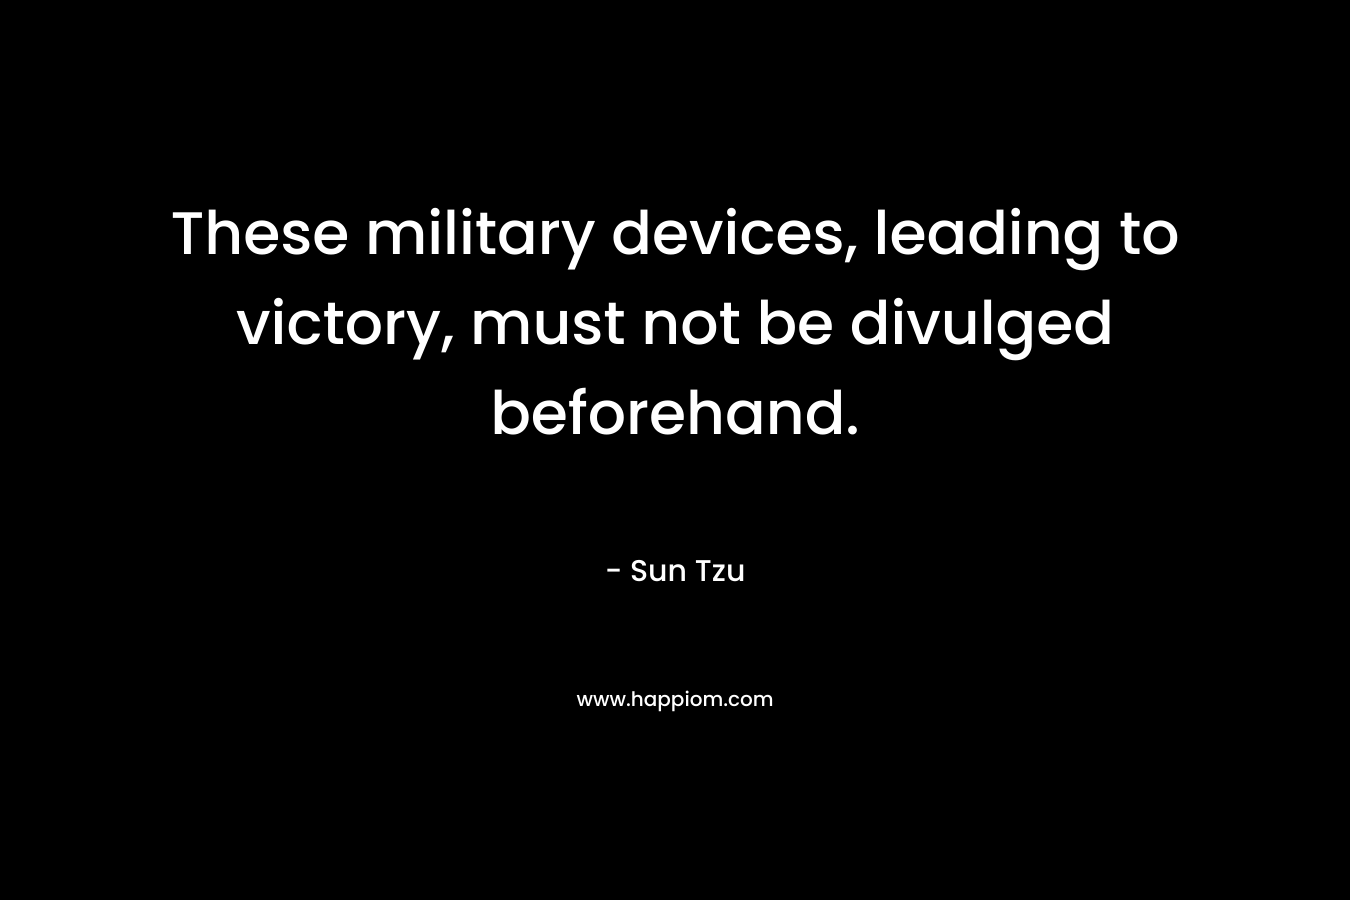 These military devices, leading to victory, must not be divulged beforehand. – Sun Tzu